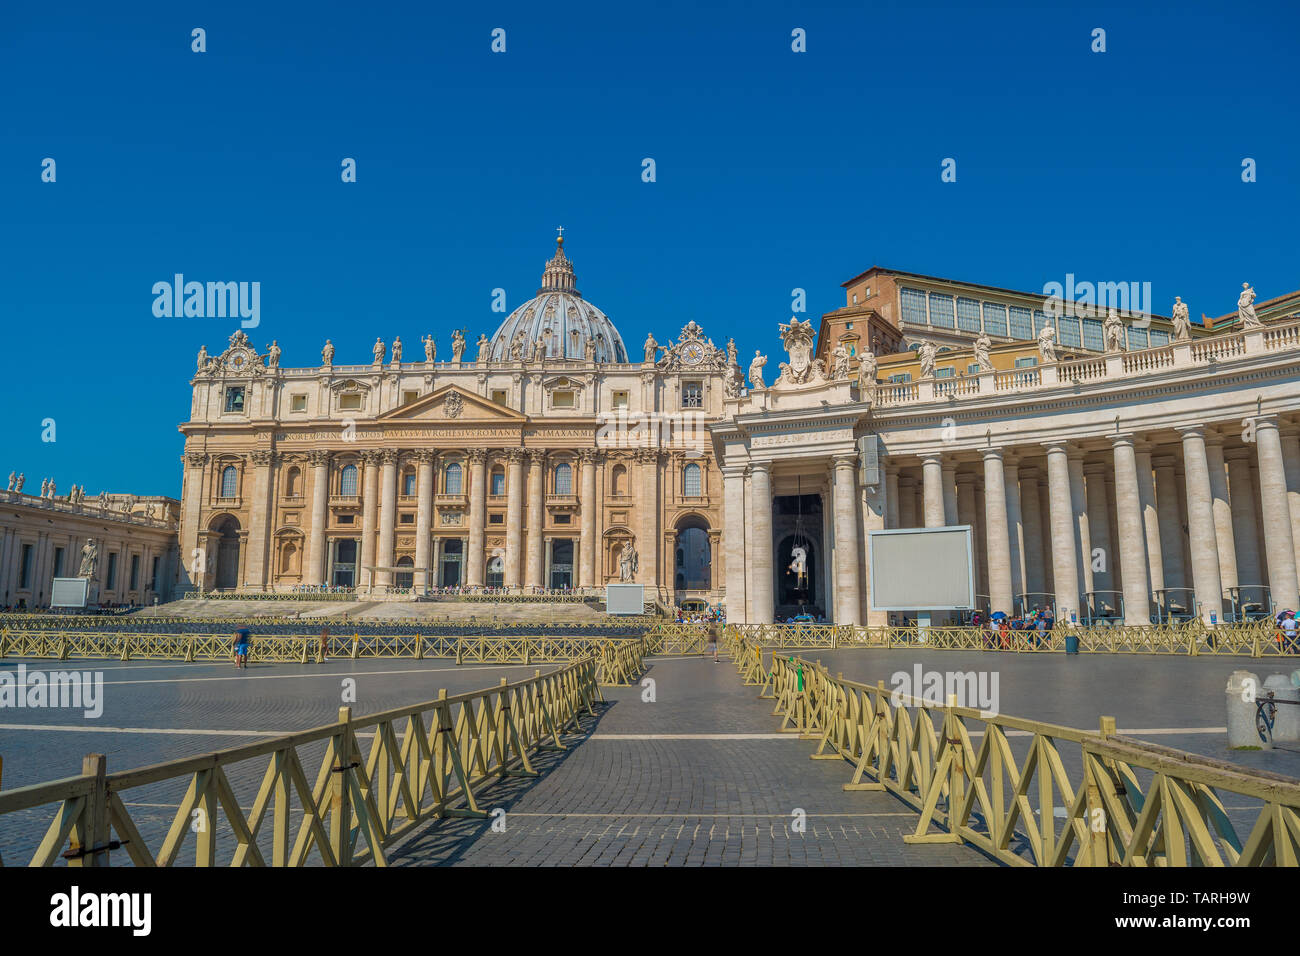 St. Peter's Basilica in the Vatican Stock Photo